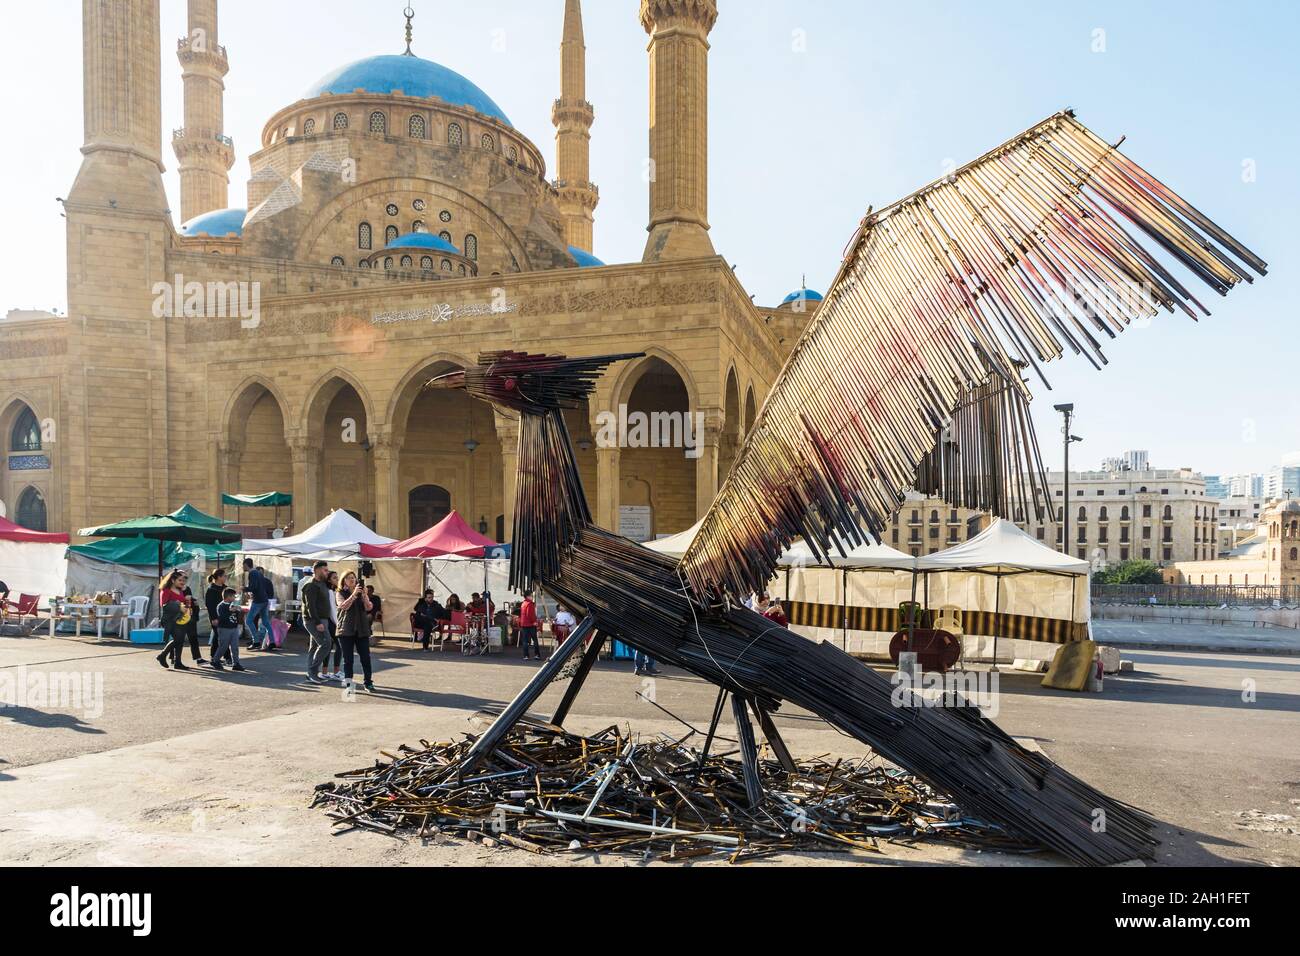 The Phoenix art installation sculpture, an idea by Hayat Nazer, in front of Mohammad al-Amin mosque, Martyrs' Square, Beirut Central District, Lebanon Stock Photo